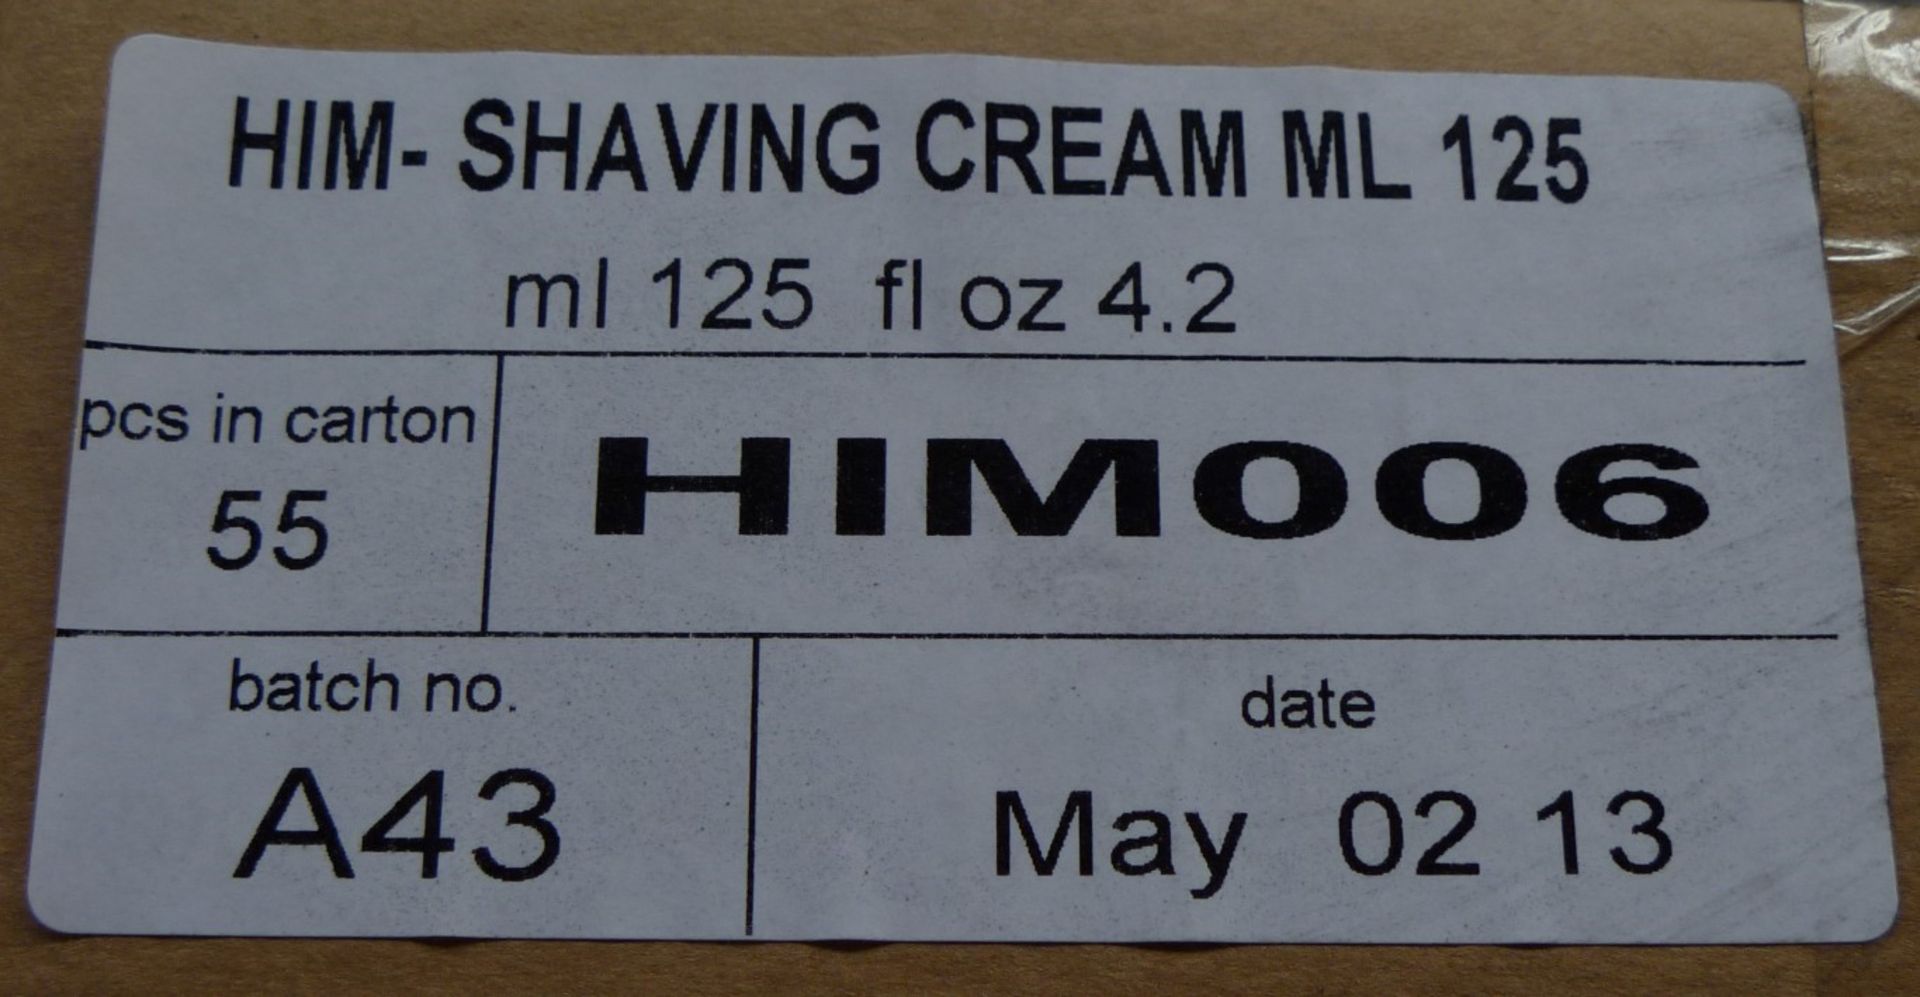 20 x HIM Intelligent Grooming Solutions - 125ml SHAVING CREAM - Brand New Stock - Alcohol Free, - Image 2 of 3